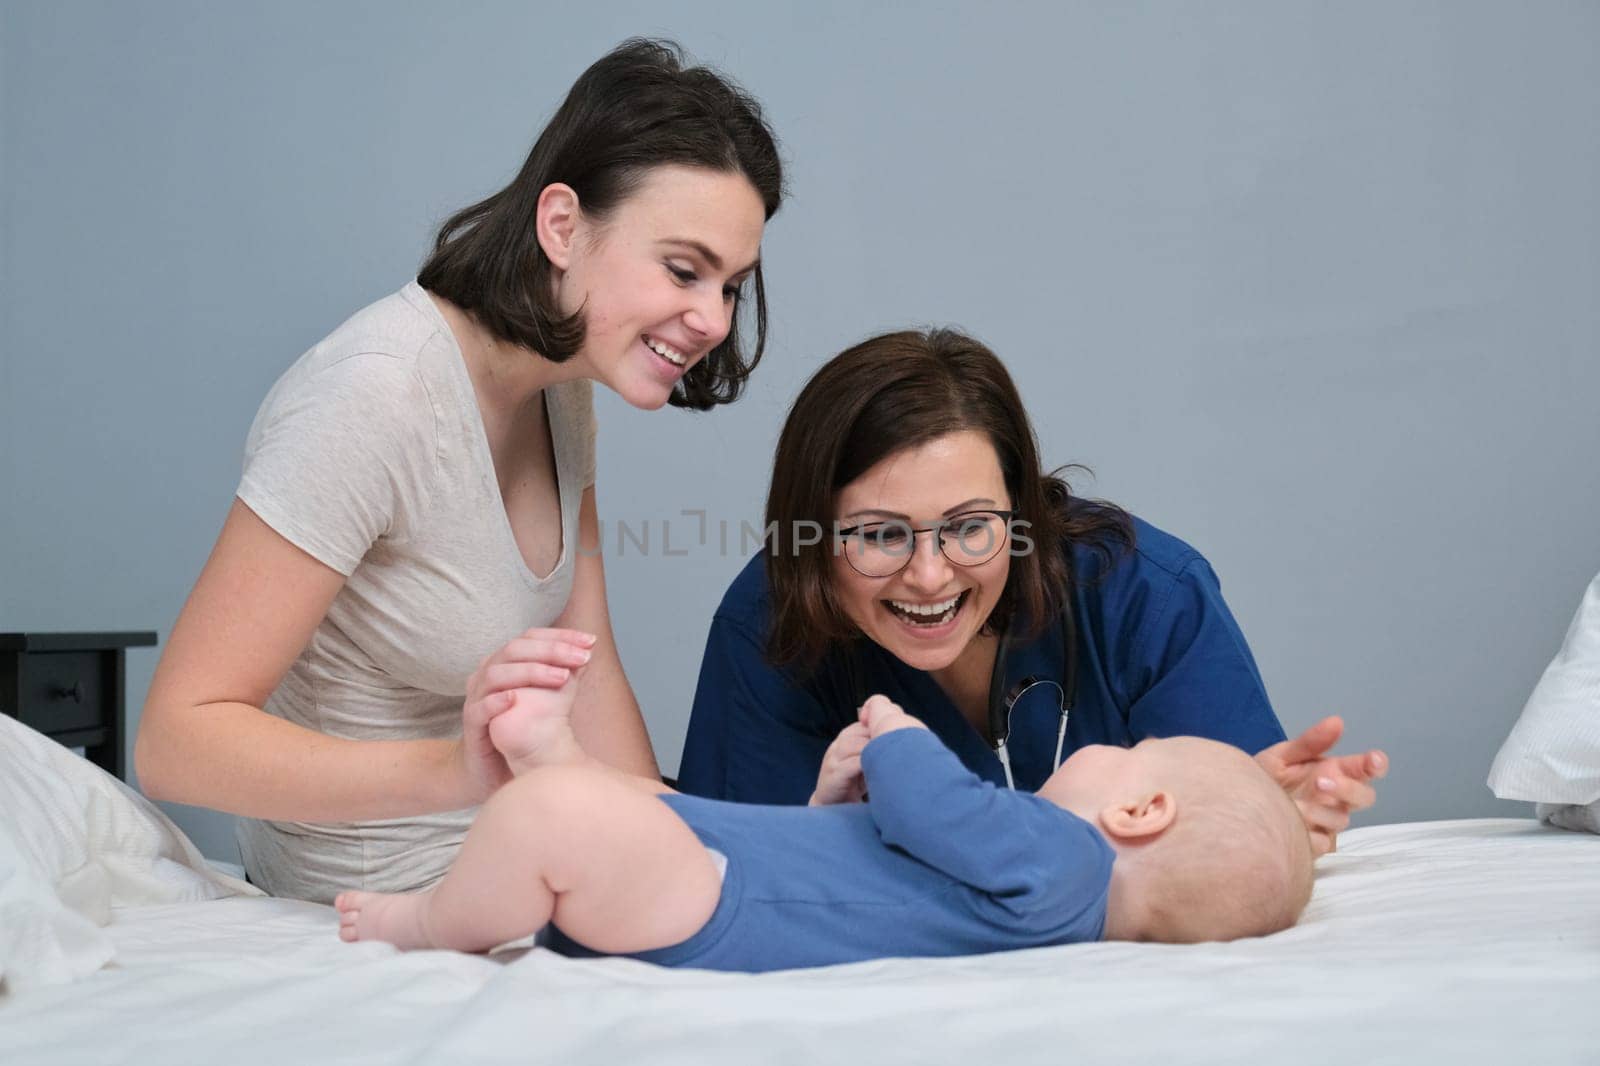 Pediatrician woman doctor in blue uniform with stethoscope talking to young mother of little boy, examining 7 month old baby at home. Pediatrics, care and health of children up to one year